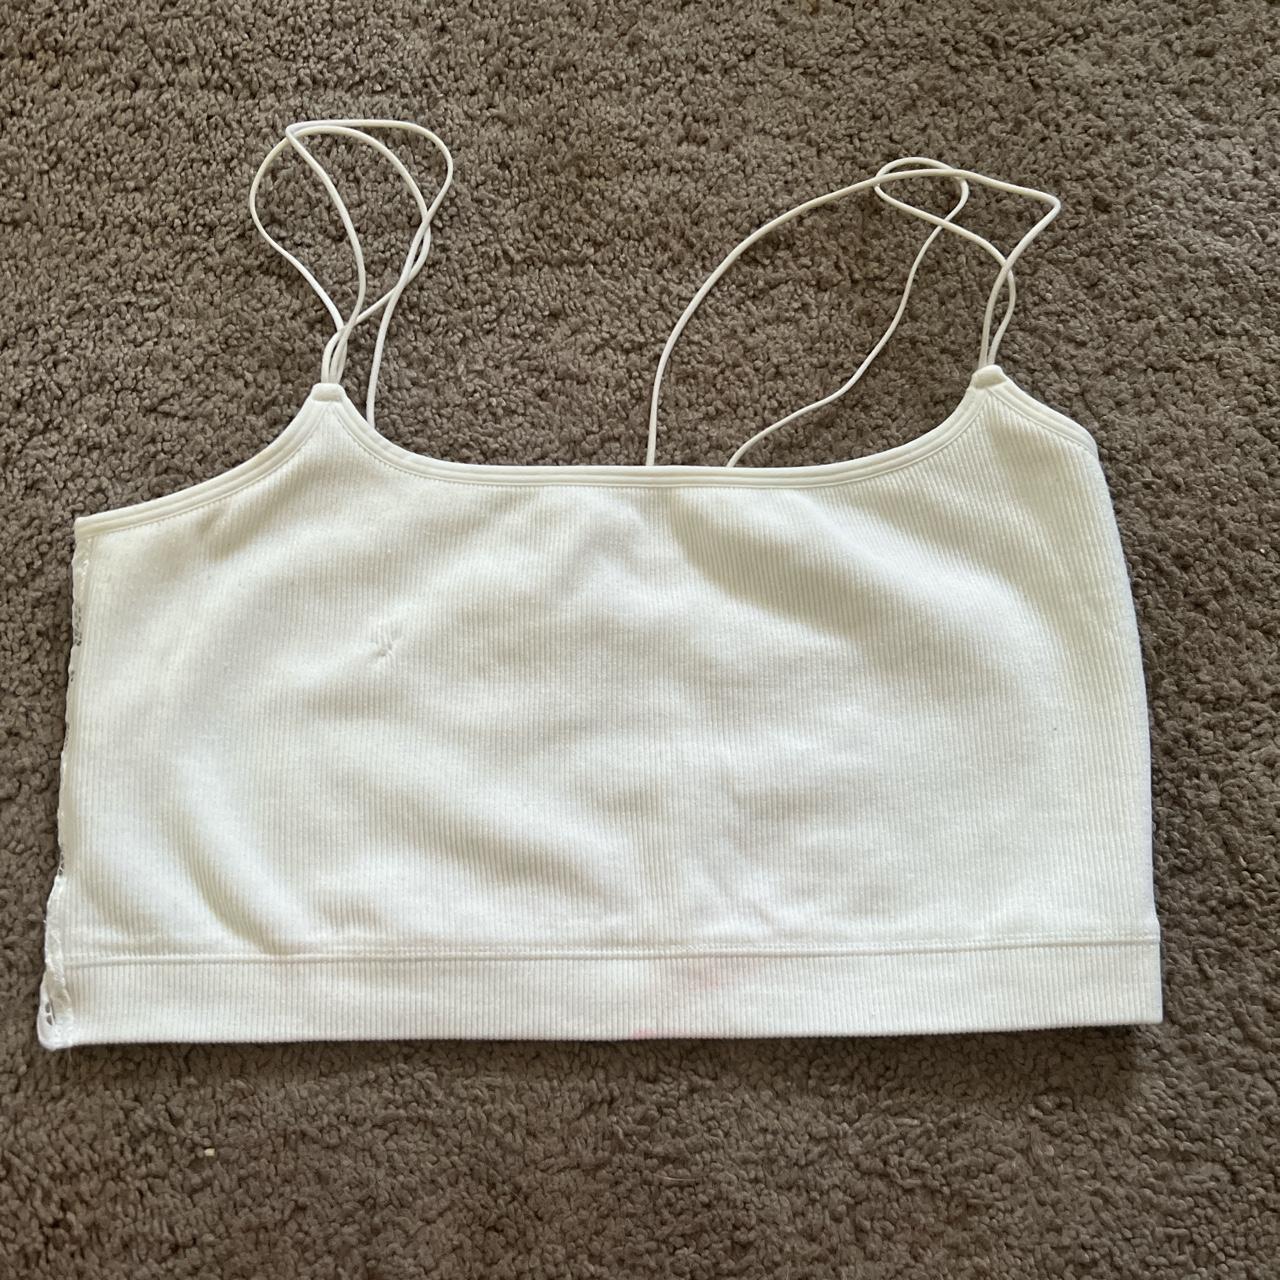 ♡ Gilly Hicks bralette crop top with lace back ♡ - Depop